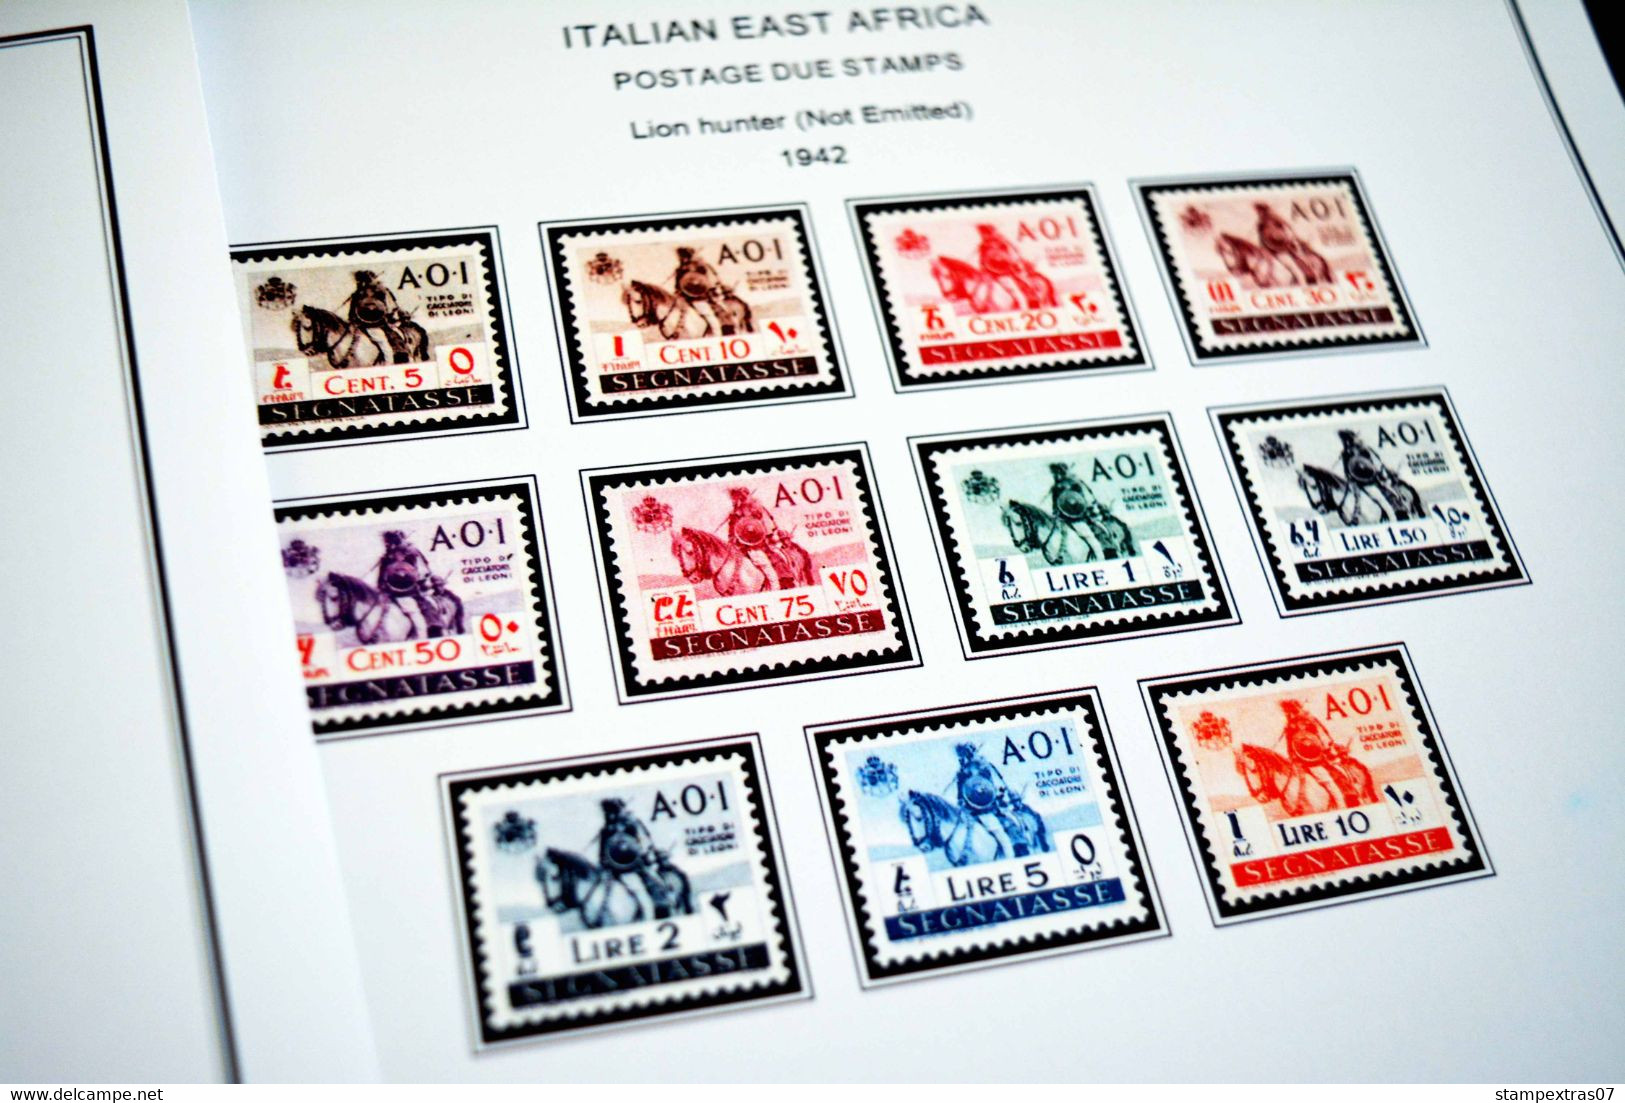 COLOR PRINTED ITALIAN EAST AFRICA 1938-1942 STAMP ALBUM PAGES (7 illustrated pages) >> FEUILLES ALBUM